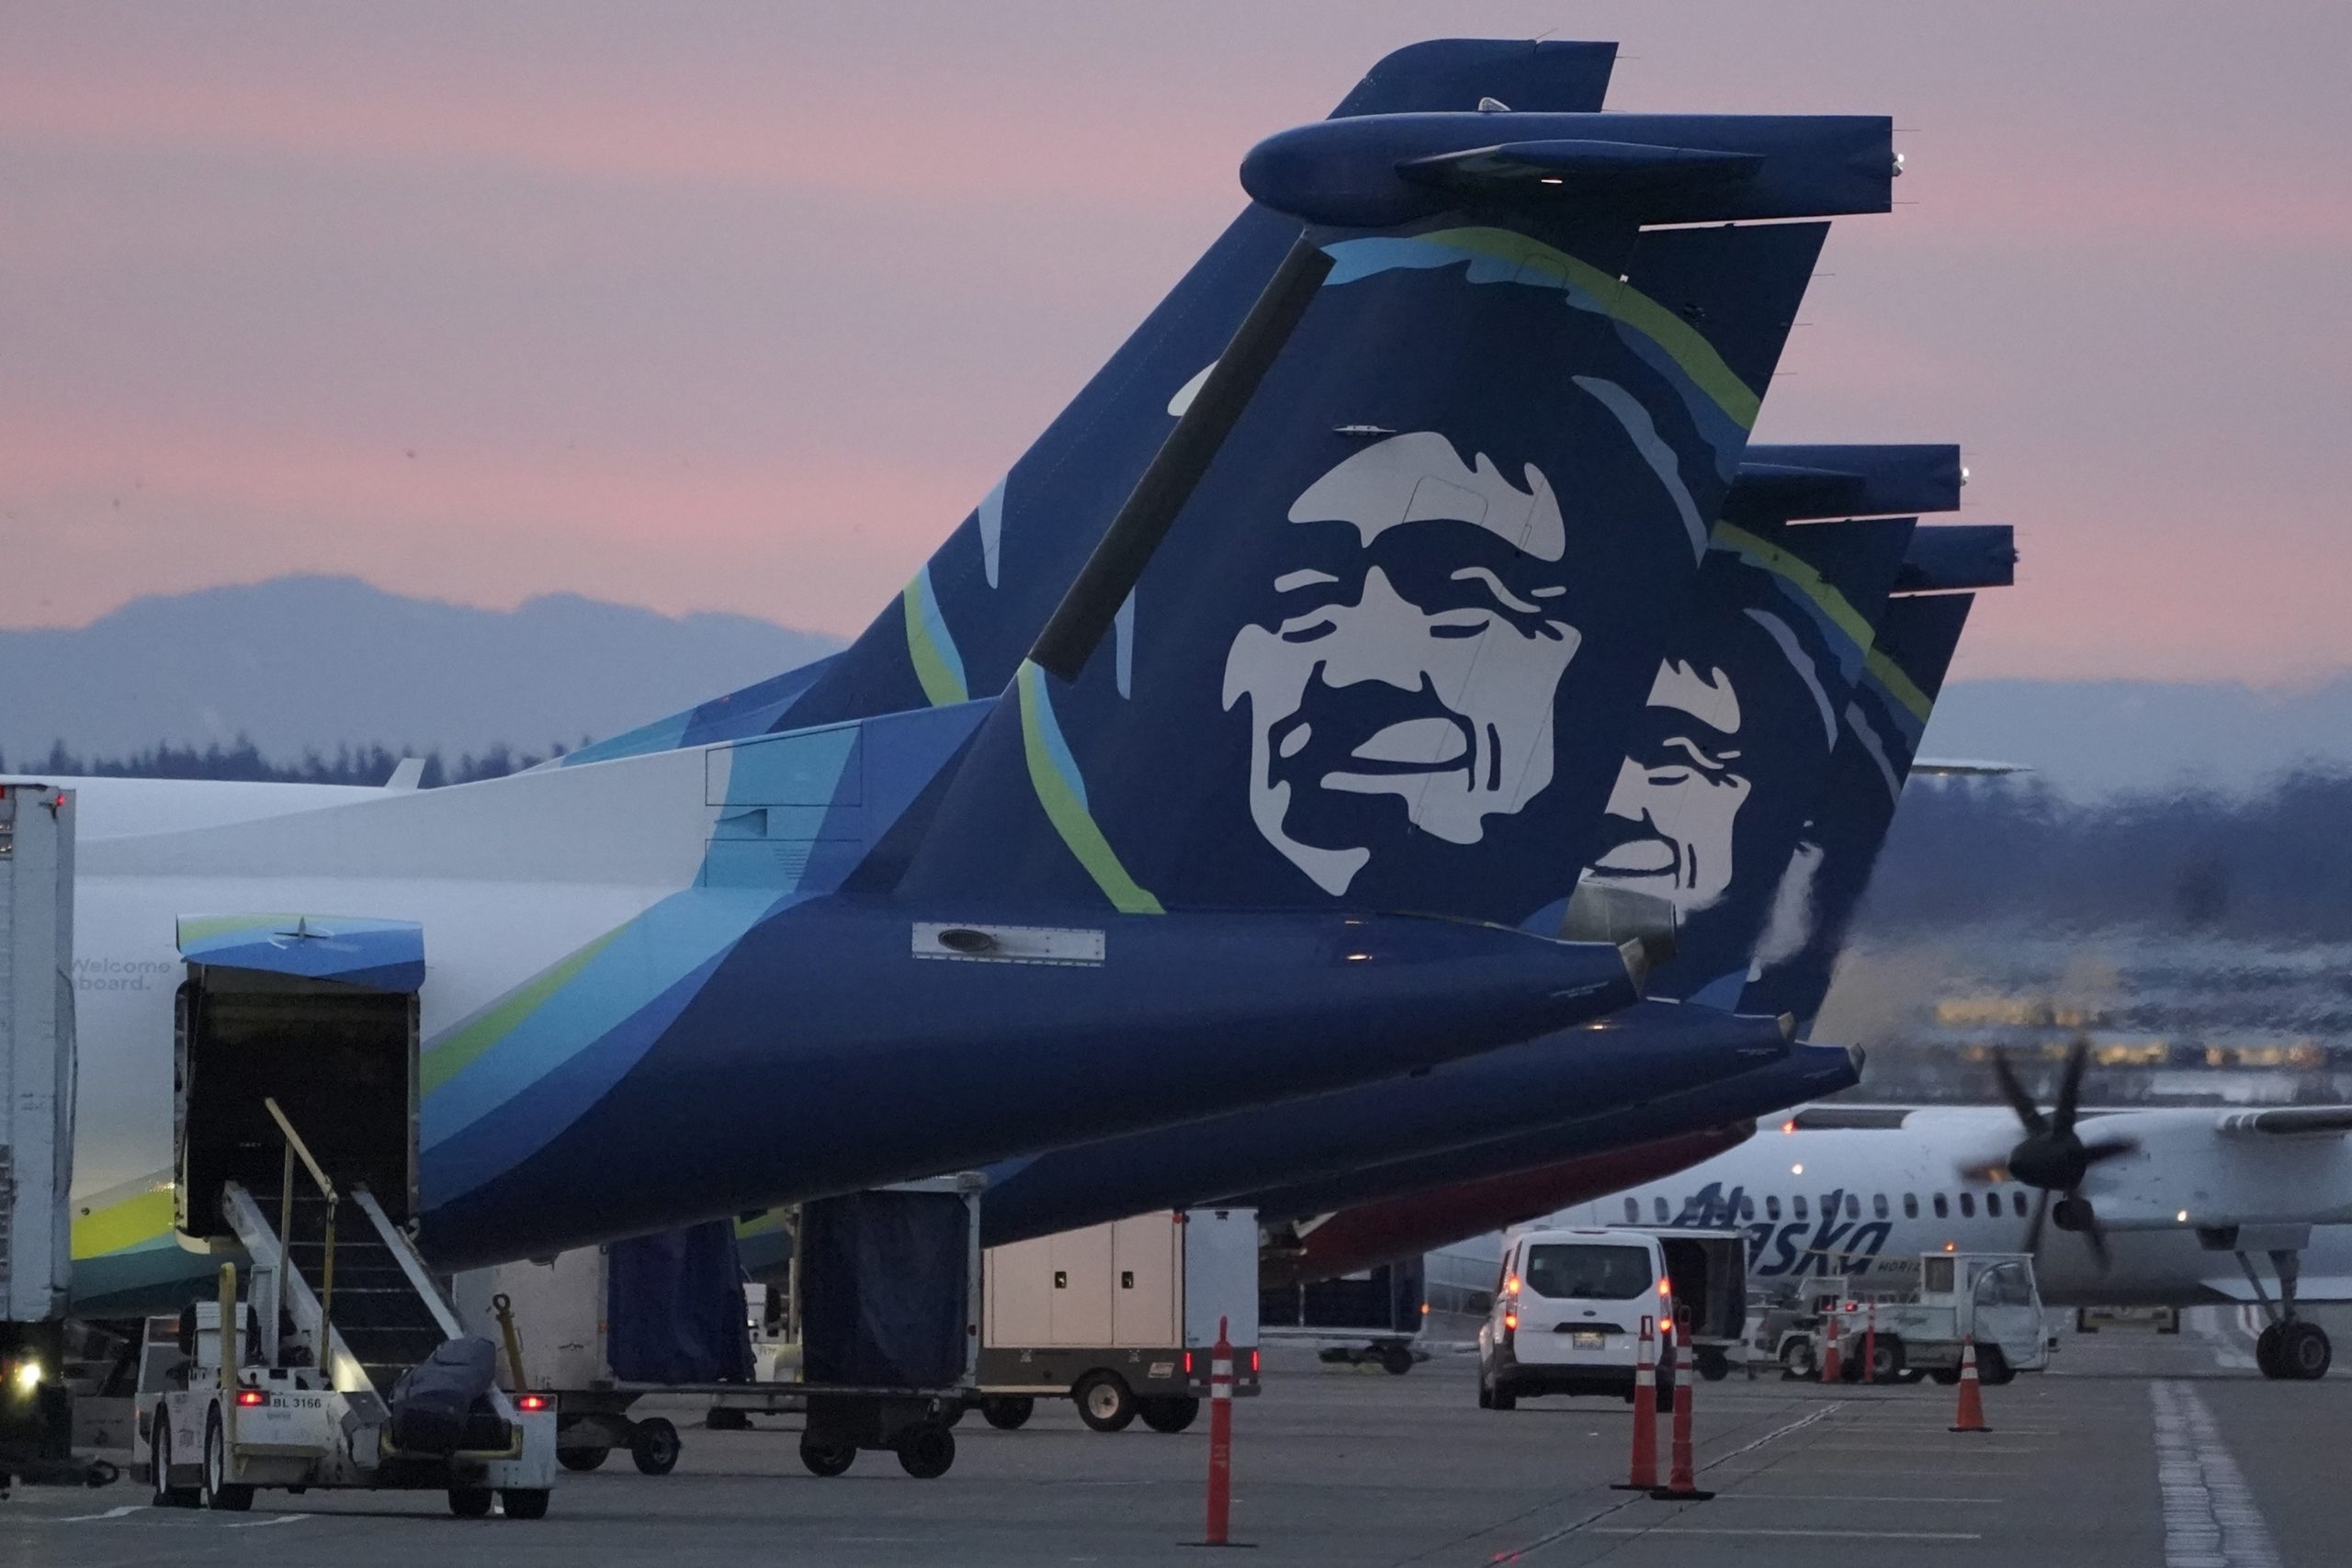 An Alaska Airlines flight made an emergency landing Friday in Oregon after a window and chunk of its fuselage blew out in mid-air, media reports said.